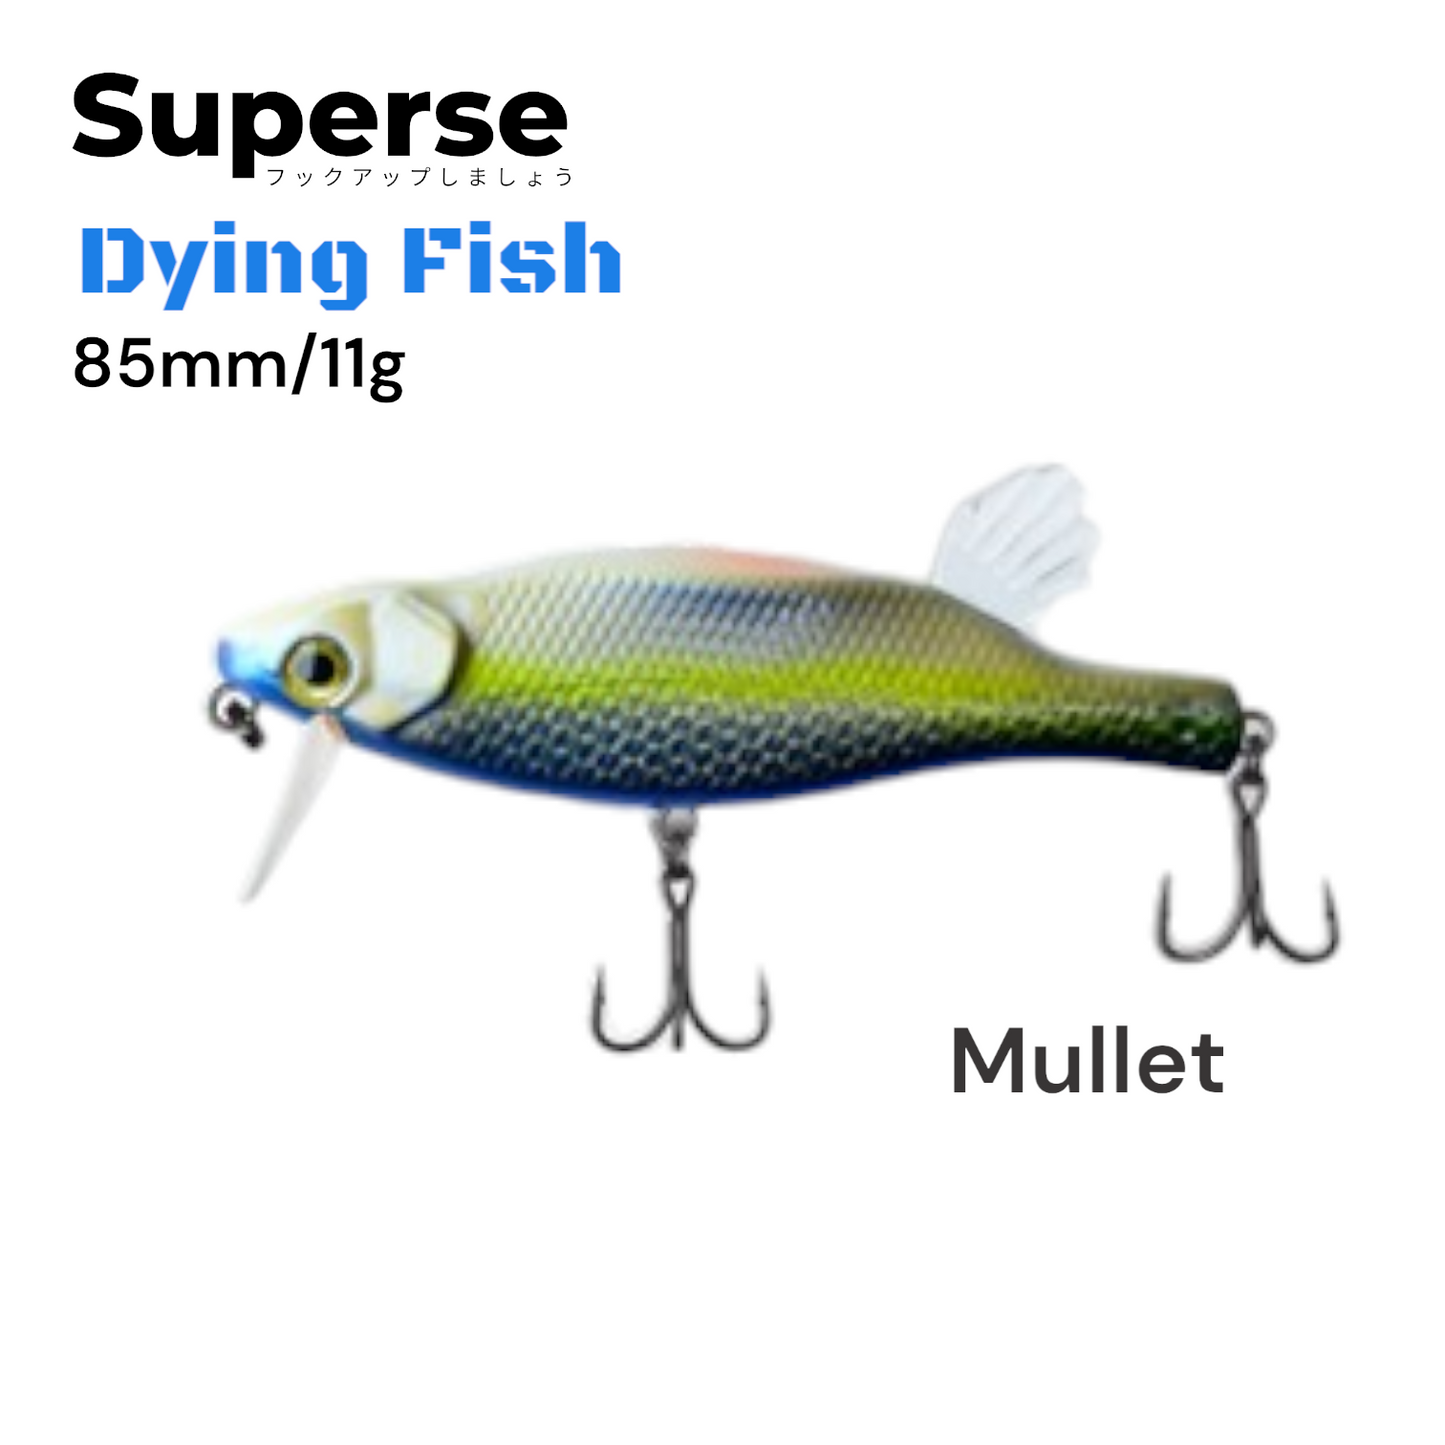 Superse Dying Fish M704